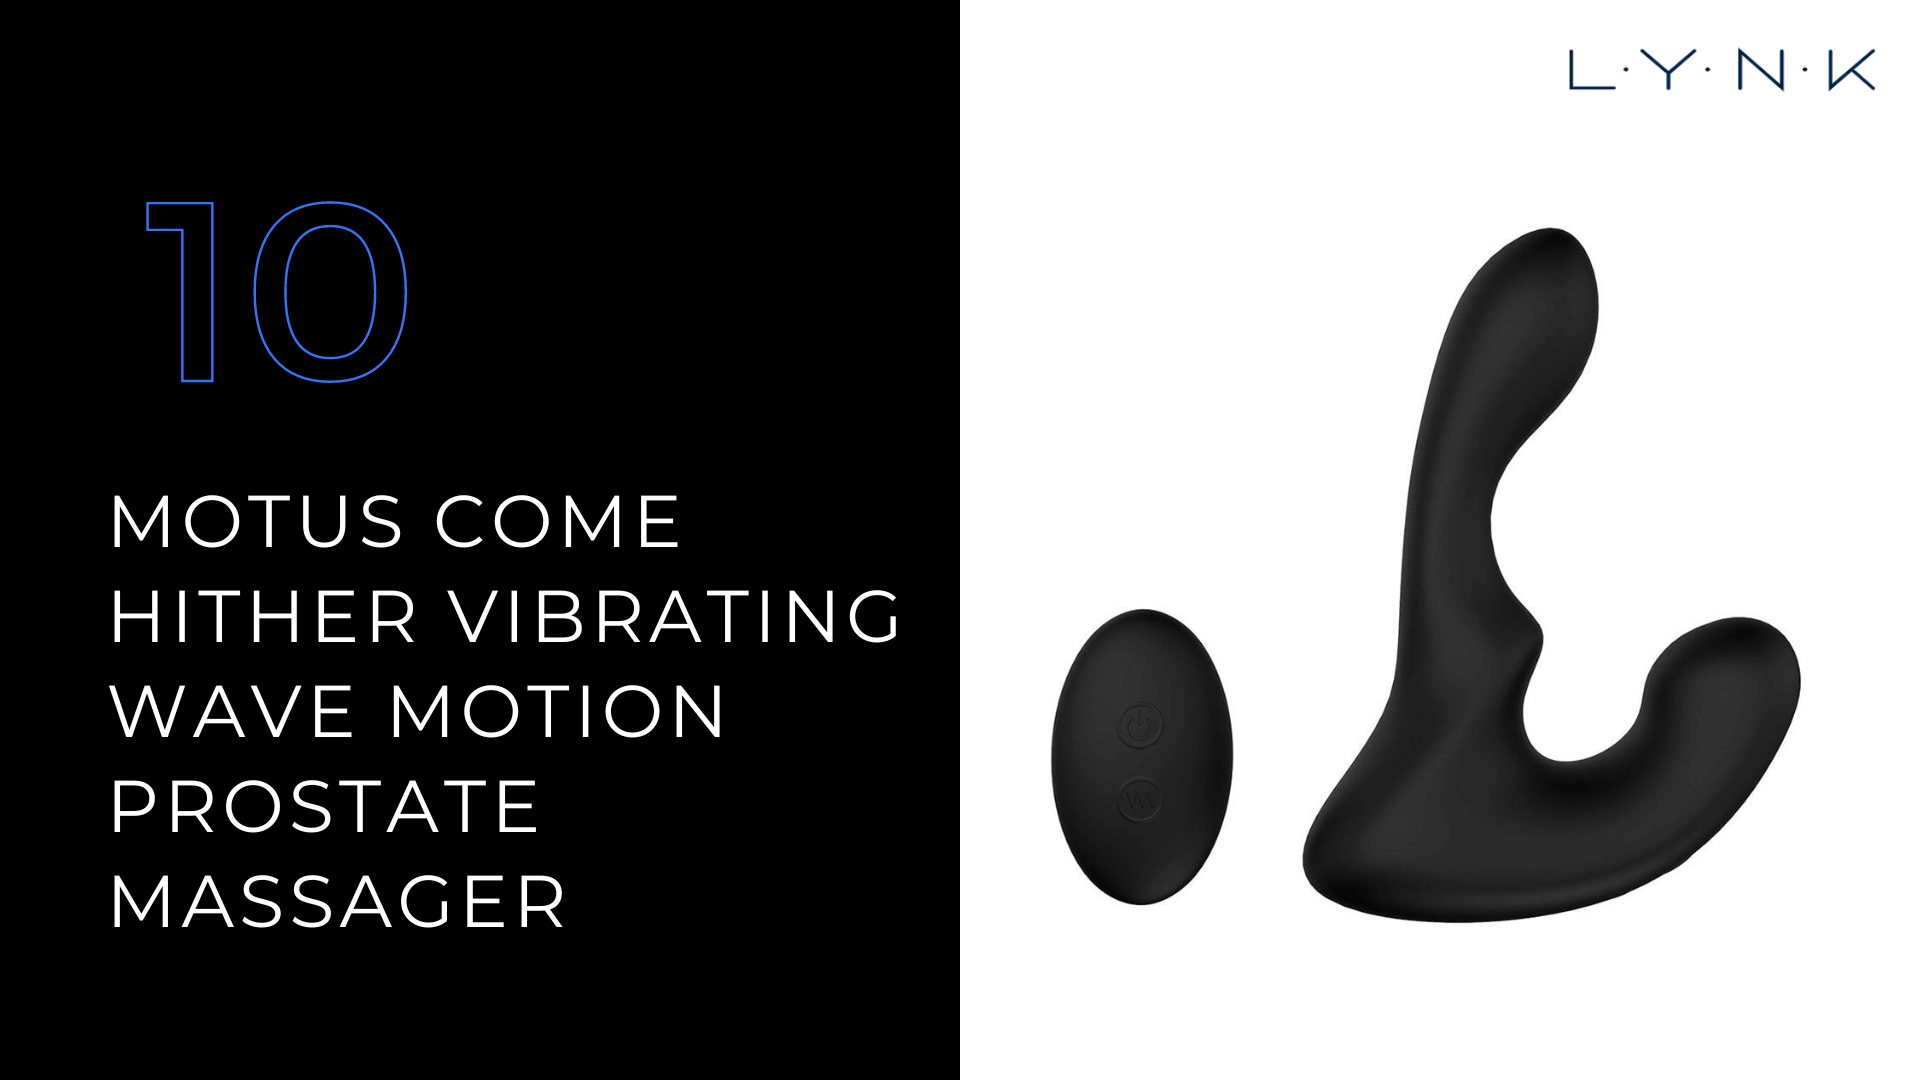 MOTUS Come Hither Vibrating Wave Motion Prostate Massager